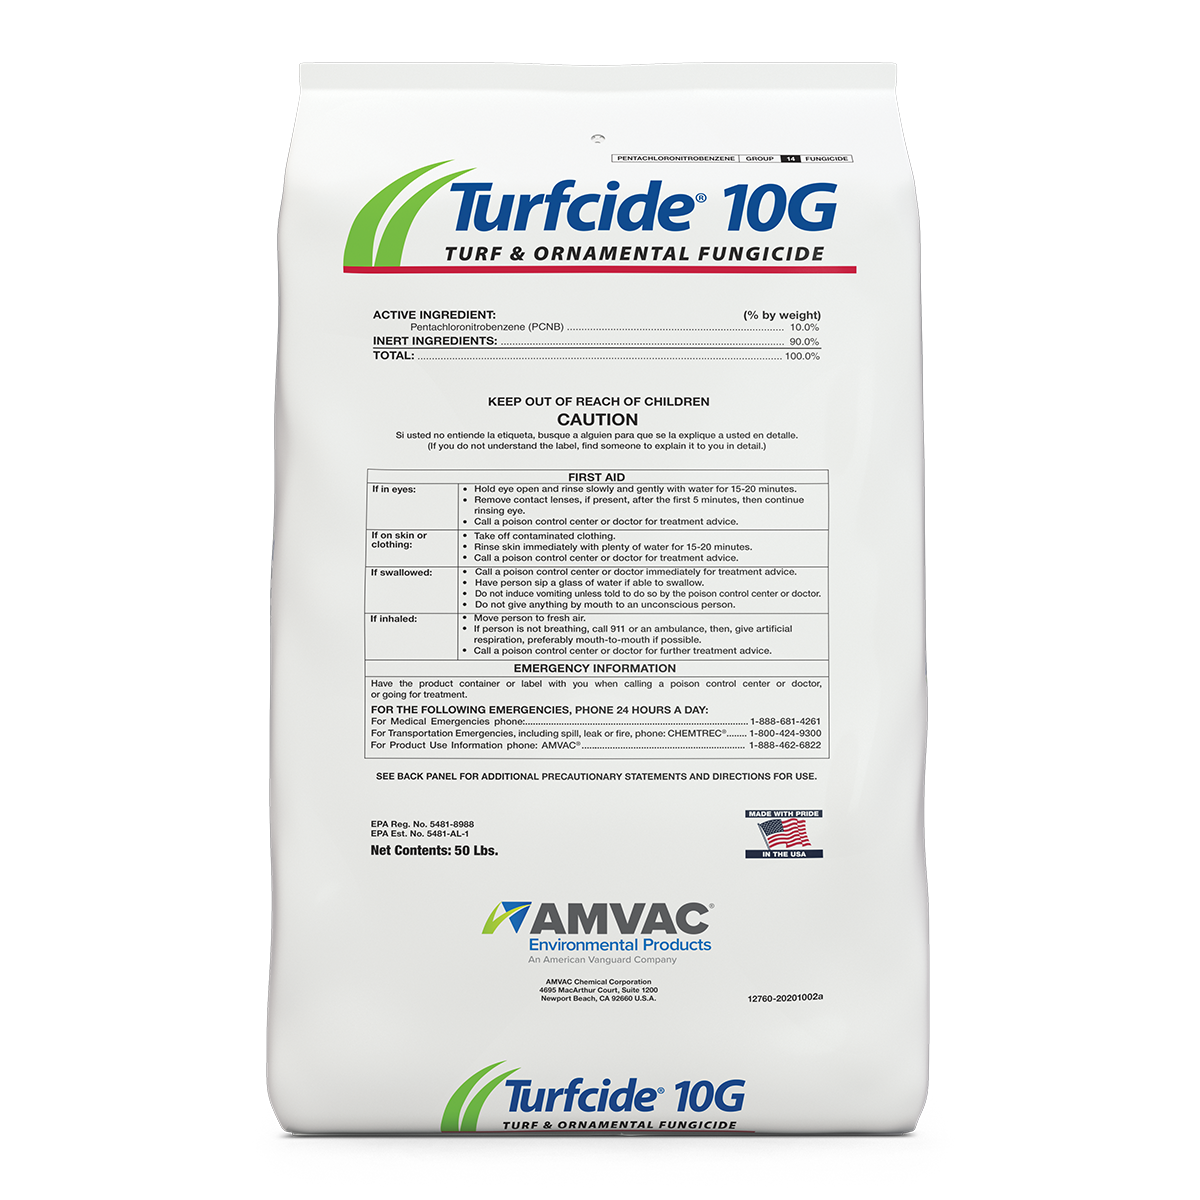 Turfcide 10G product package